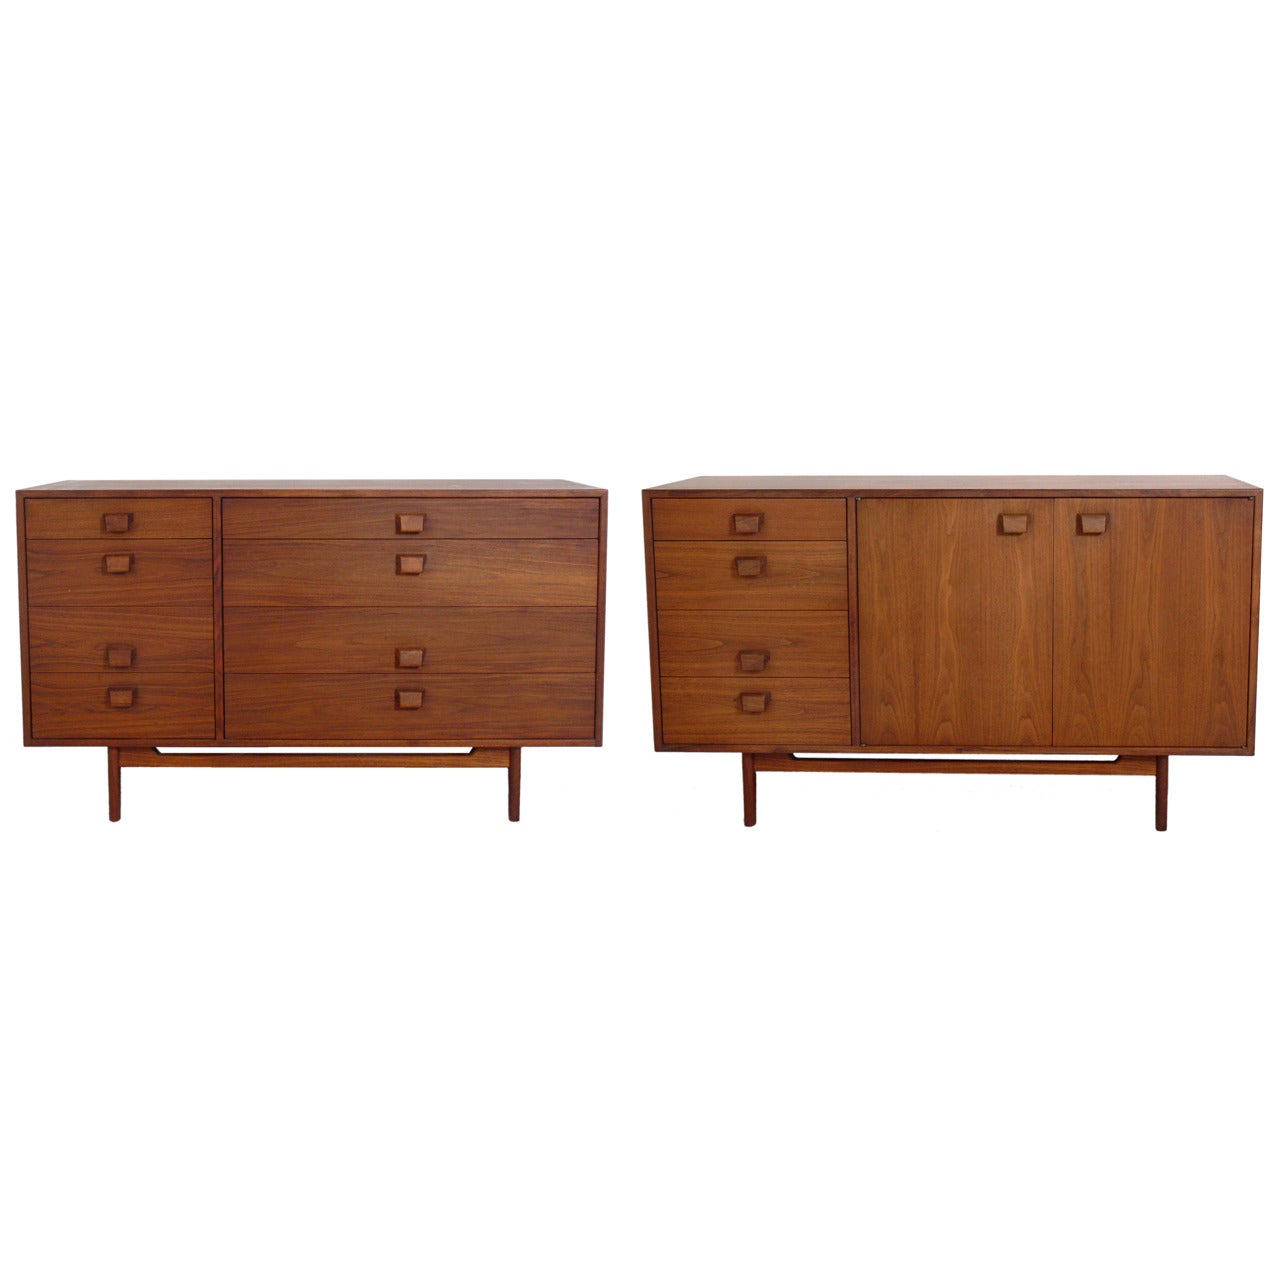 Two Modern Chests or Credenzas designed by Jens Risom